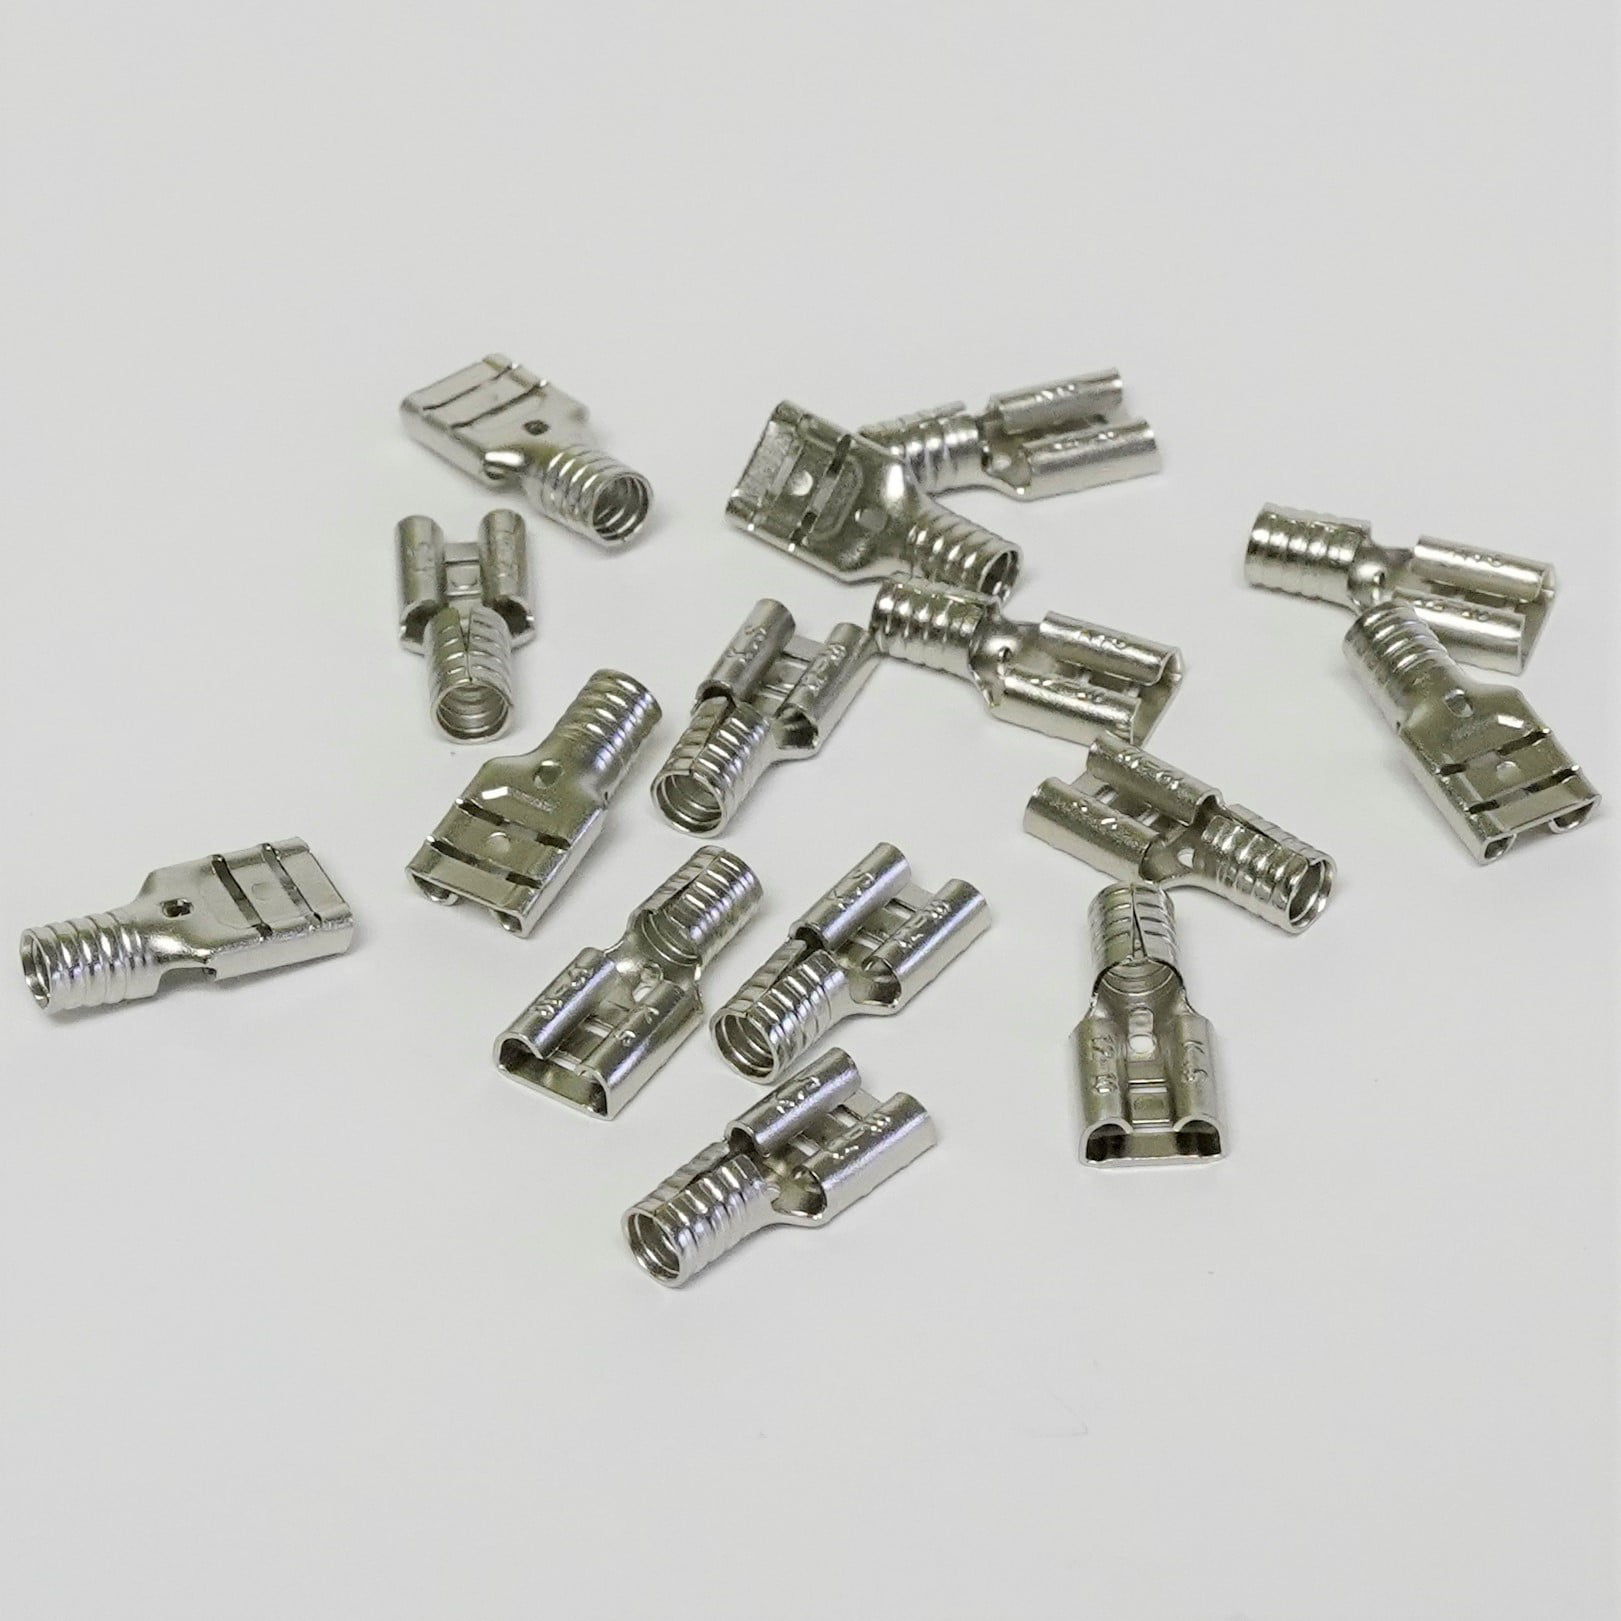 50 High Temperature QD Terminal Connector 12-10 Wire Gauge AWG .250 Female 900°F